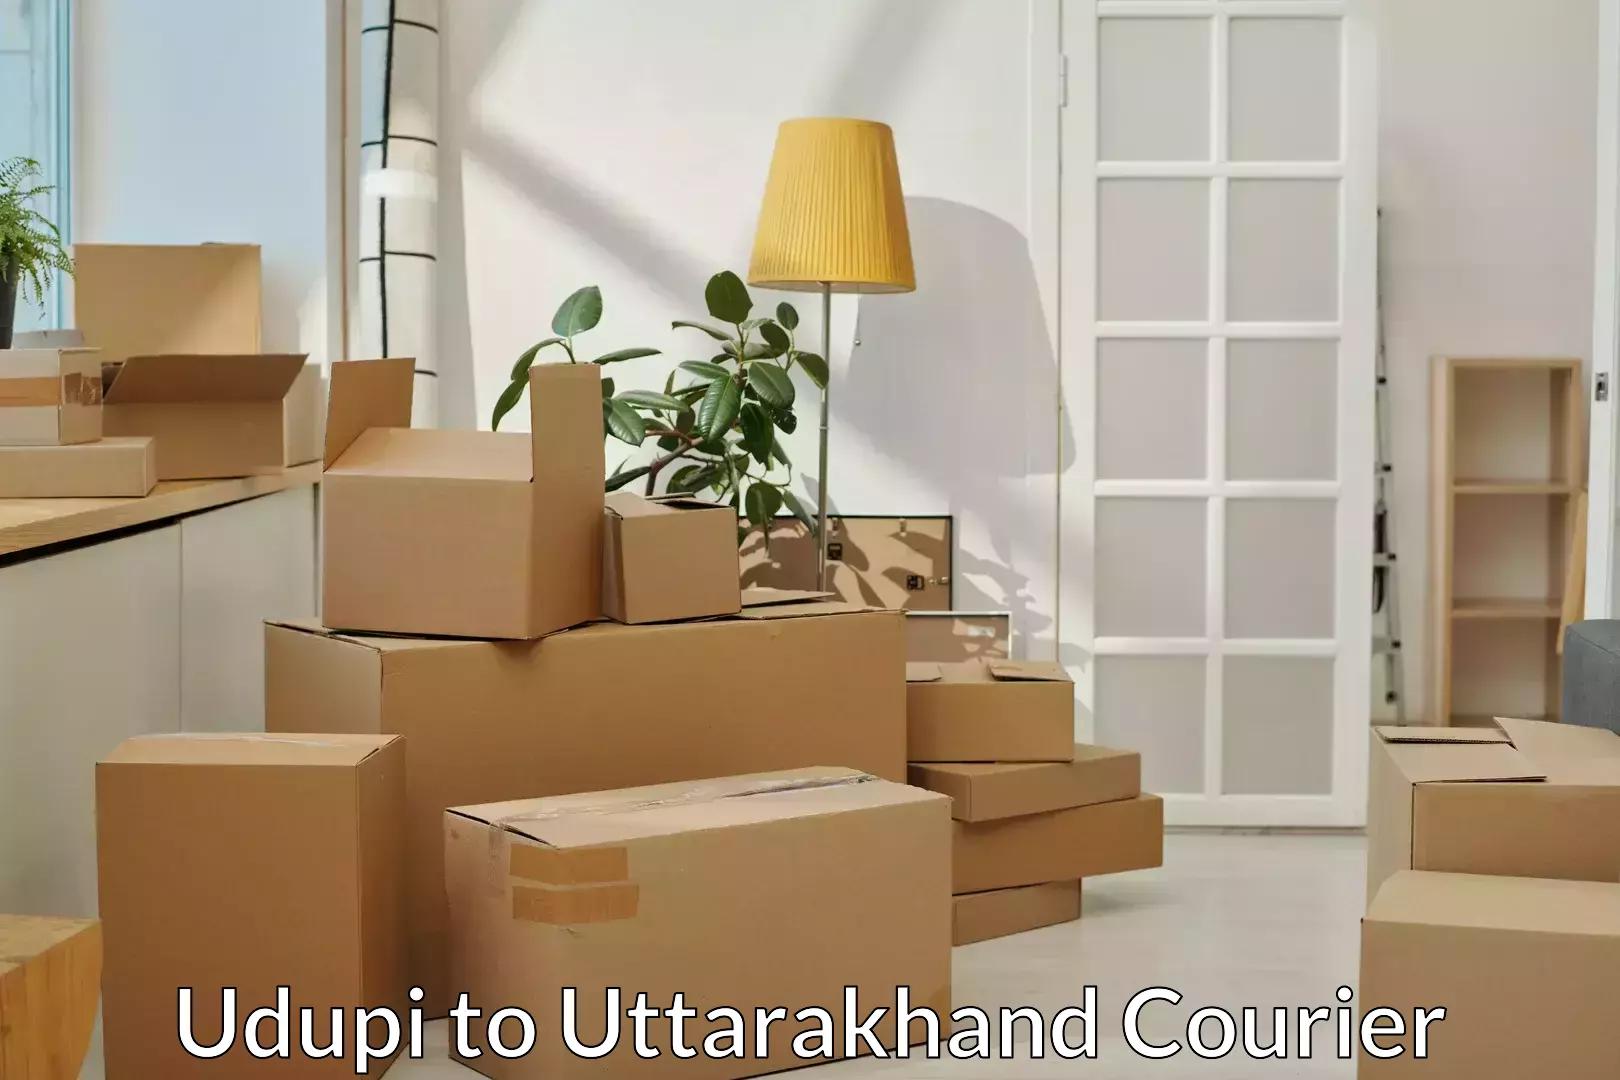 Budget-friendly moving services Udupi to Rudrapur